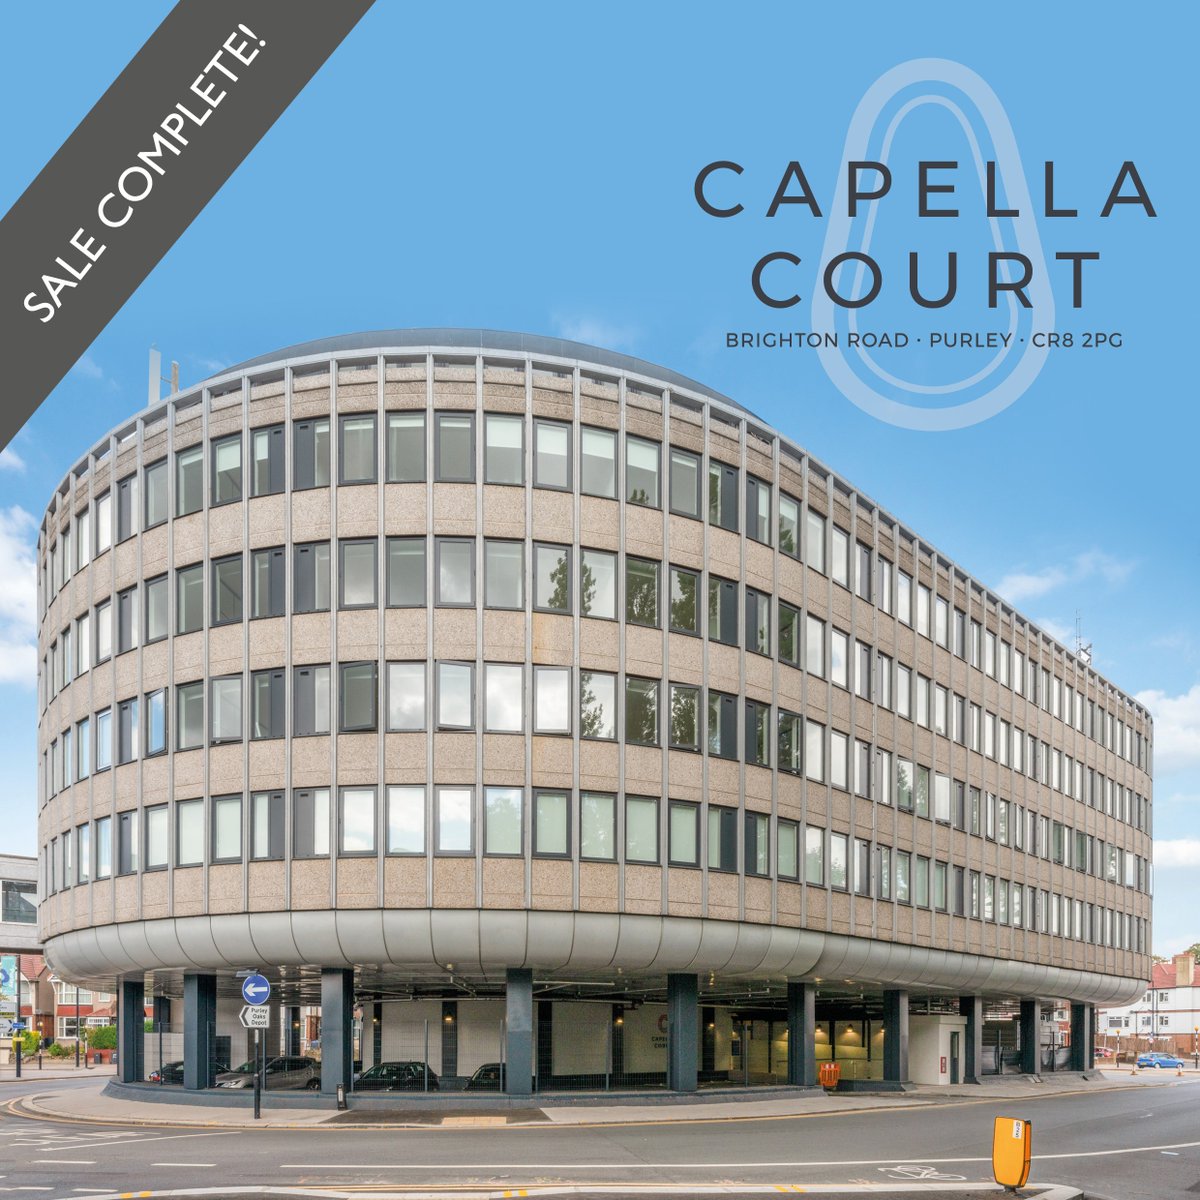 @CliftonAgency have completed on the #sale of Capella Court, #Purley. The 86-unit, fully stabilised PRS block, which was purchased by an overseas investor for £26,000,000 following a competitive bidding process.

#privaterentedsector #buildtorent #residential #investment